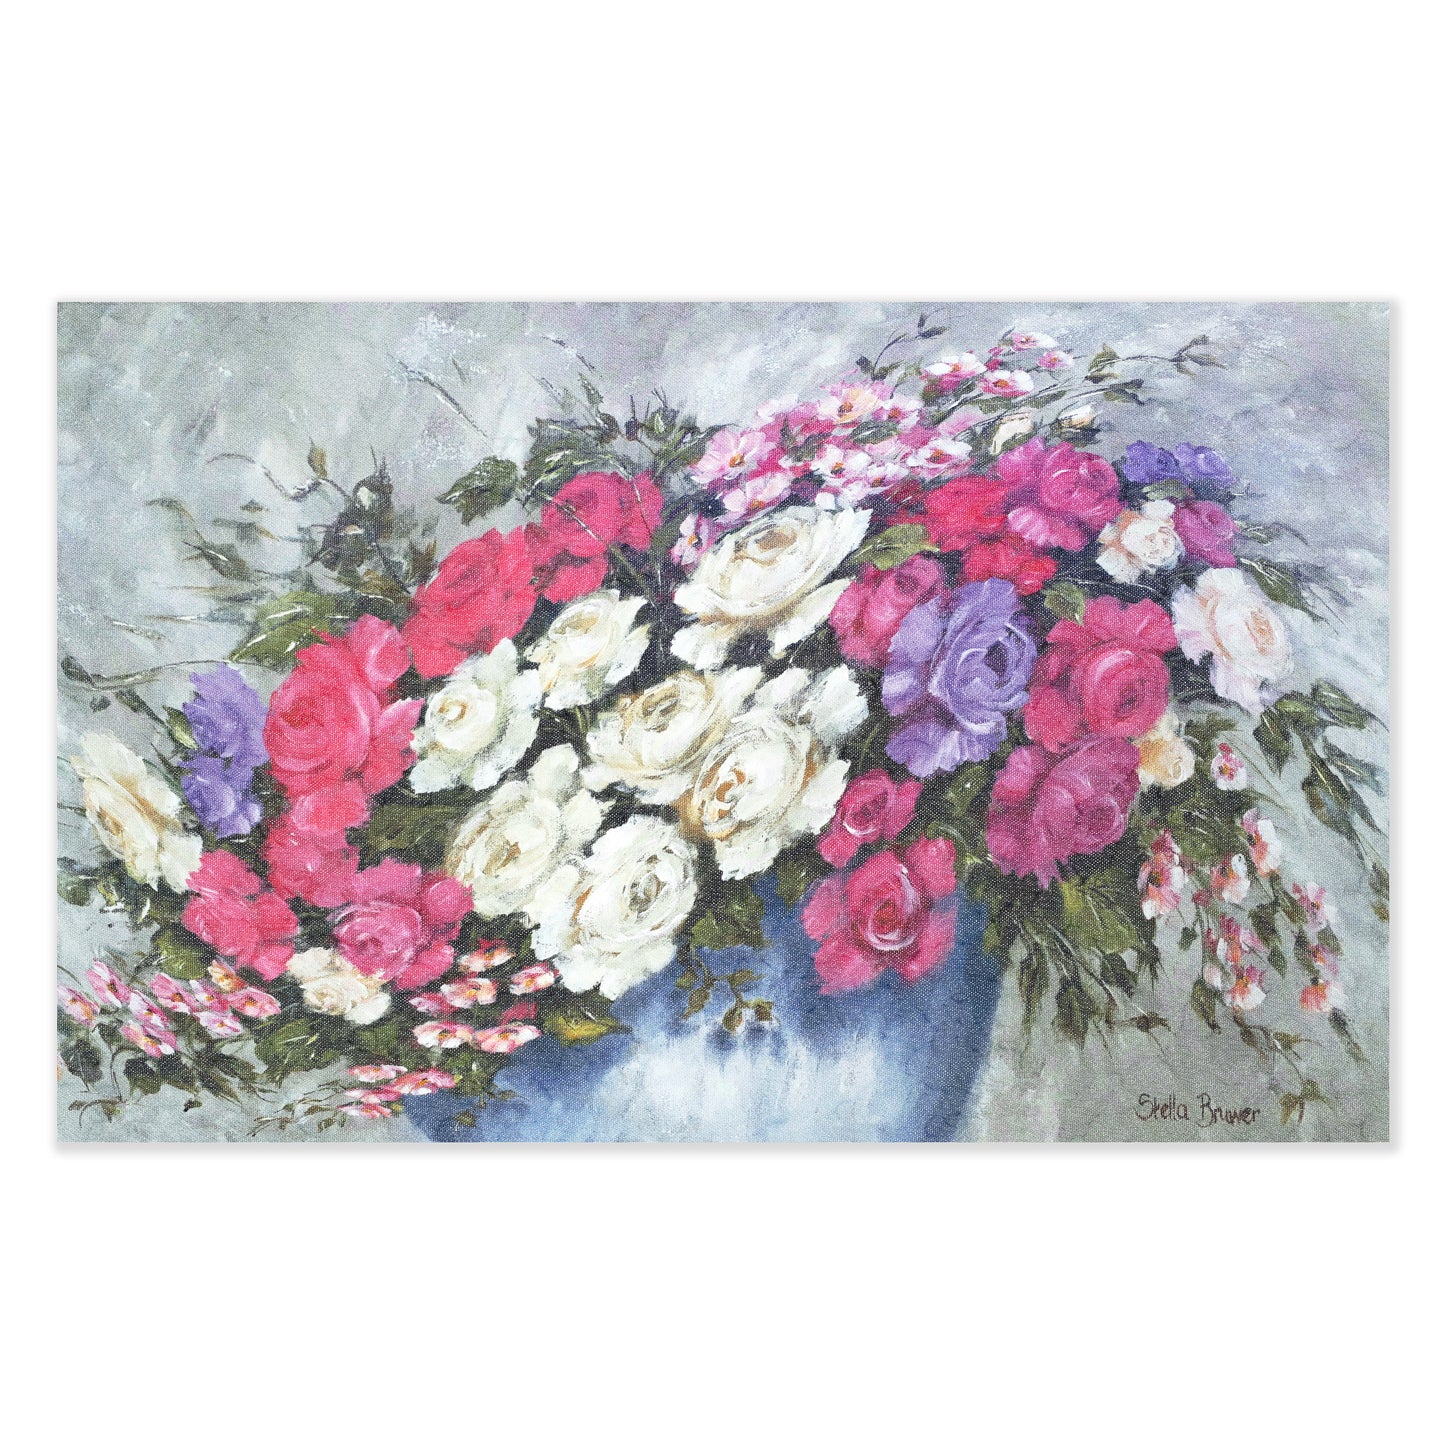 Pink and White Blossoms in Bucket Table Net Cover by Stella Bruwer